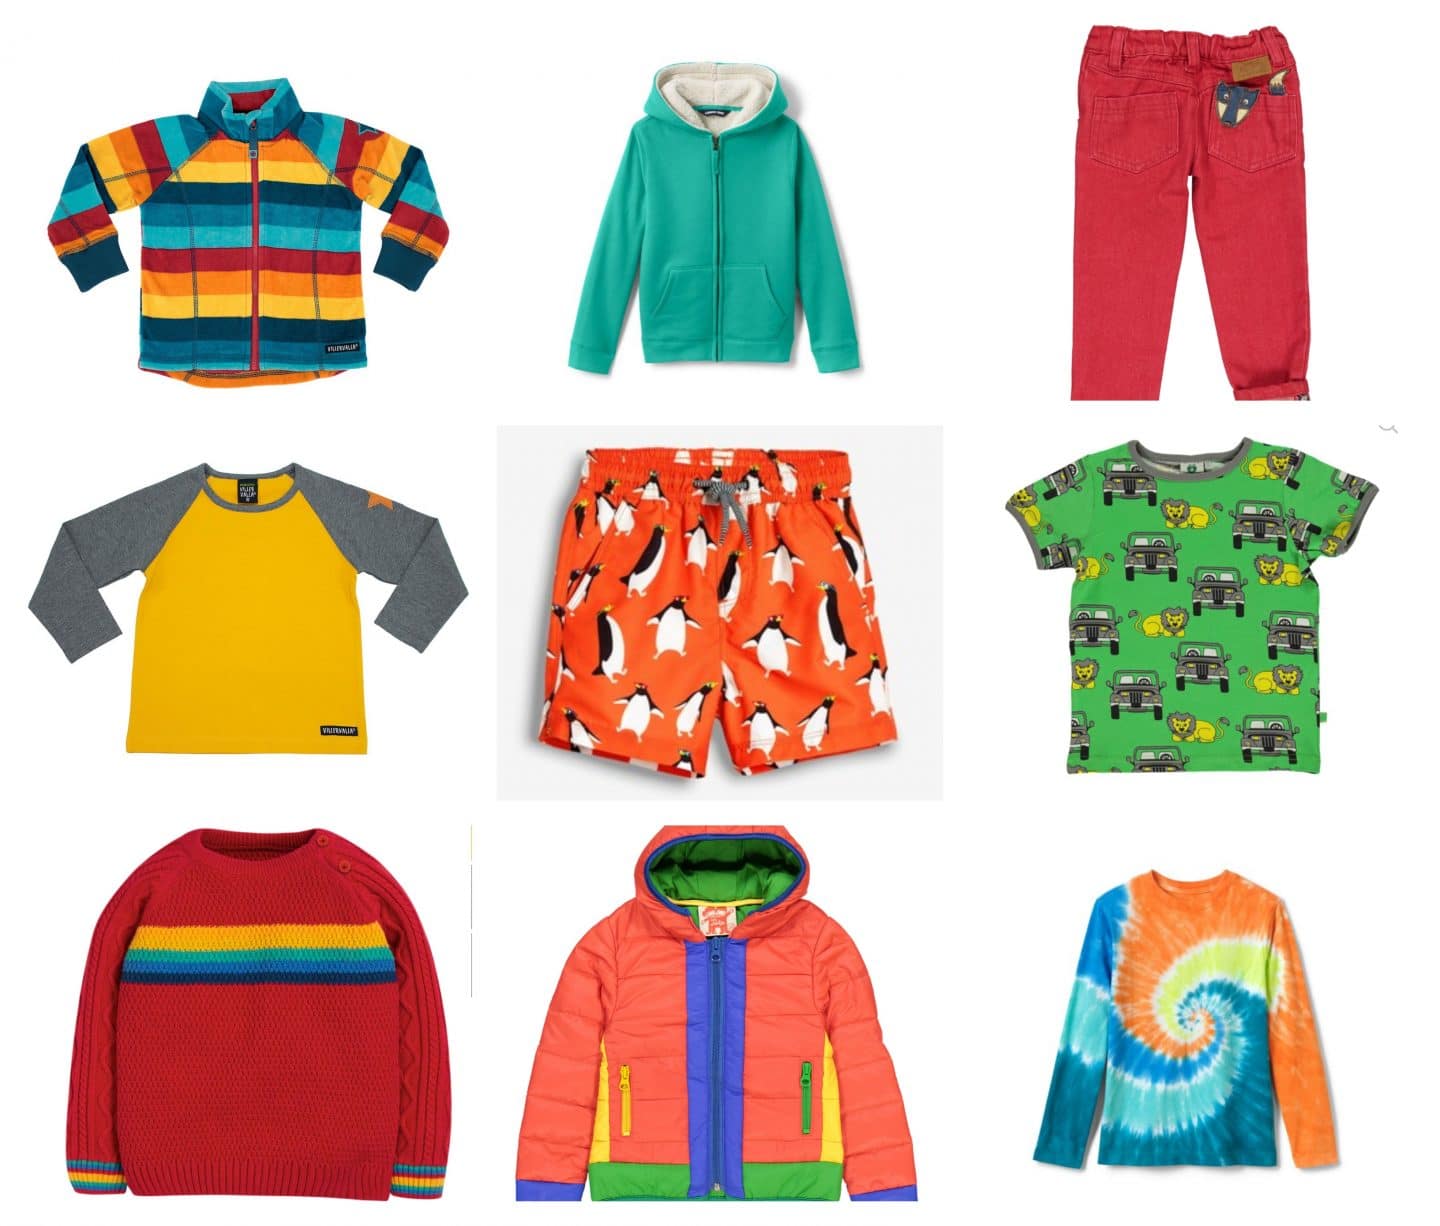 10 Older Boys Bright Clothes Brands - Monkey and Mouse